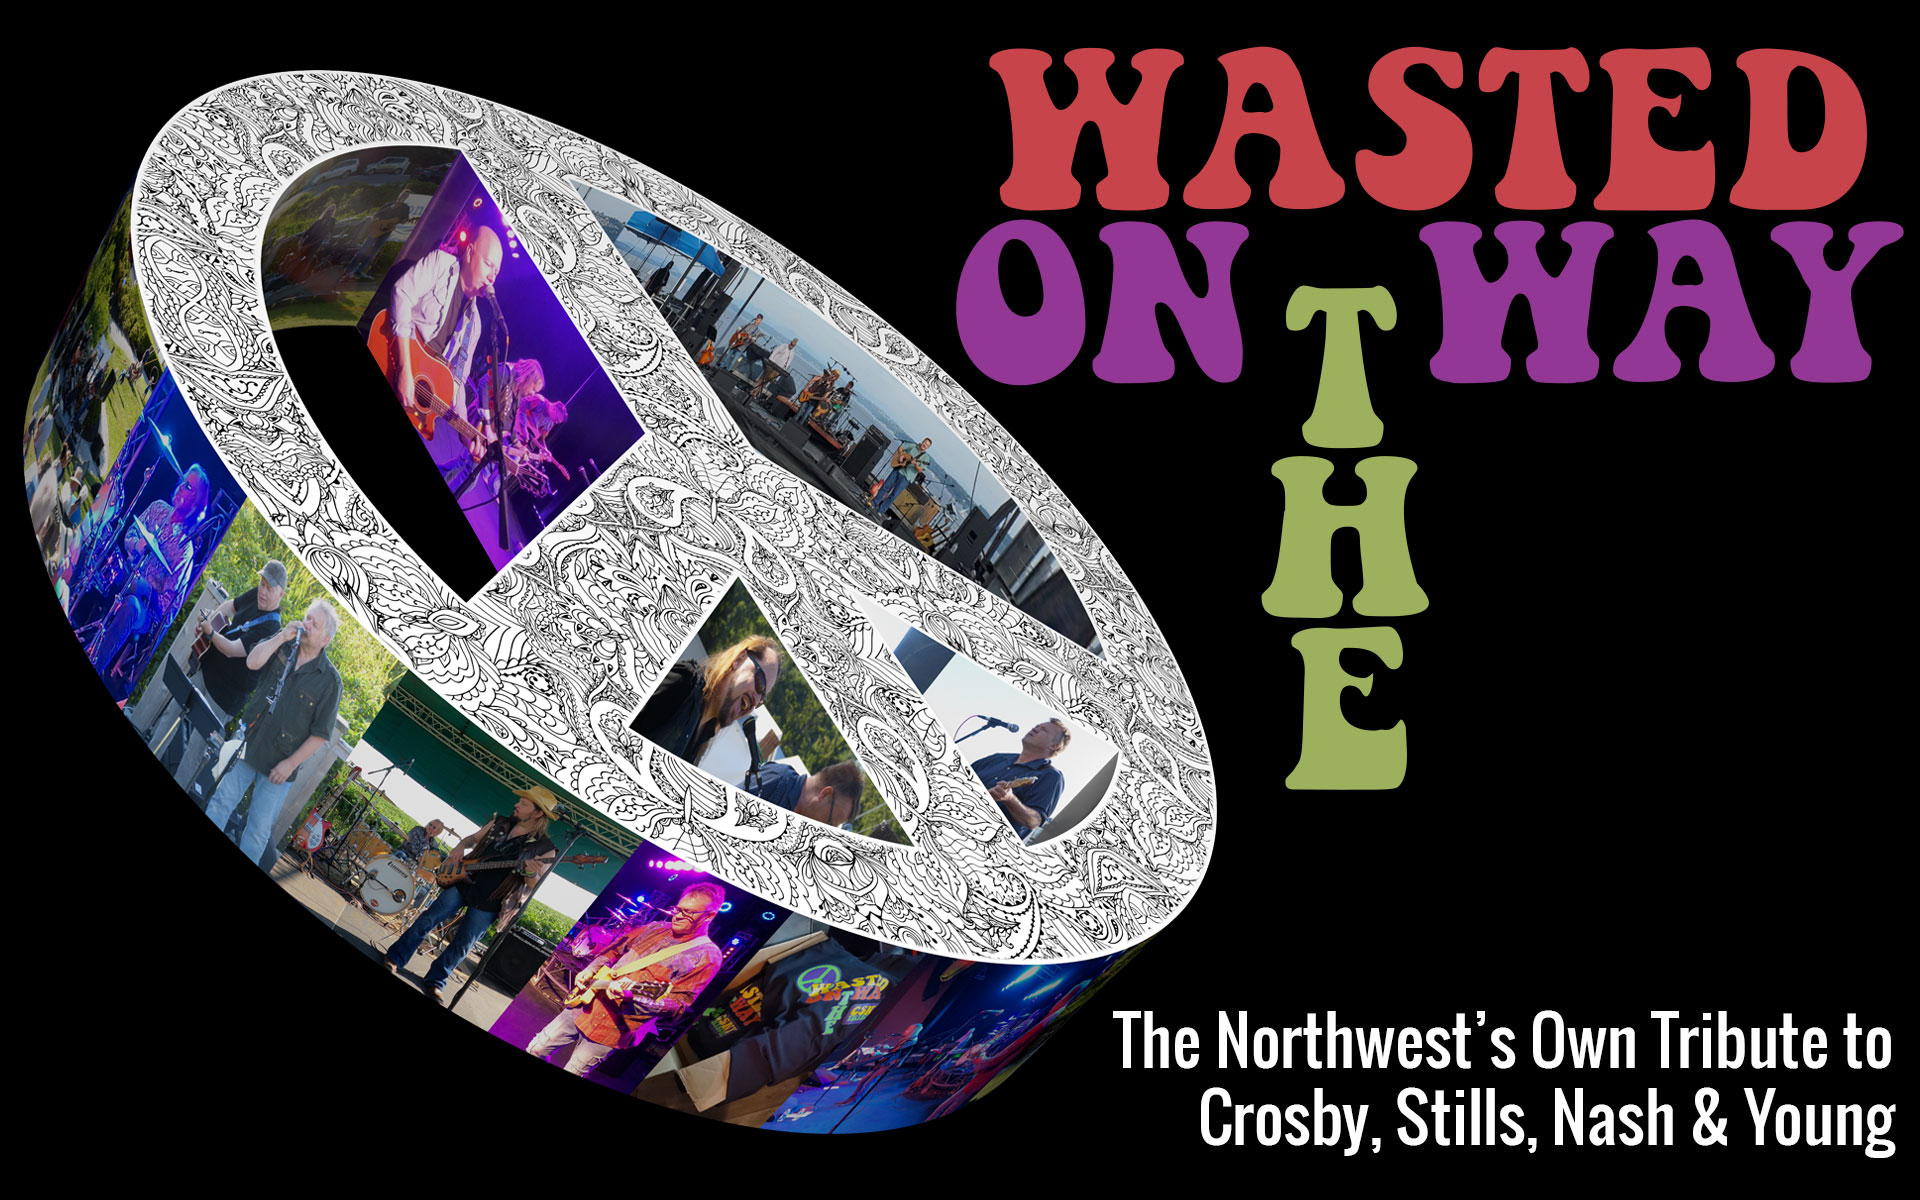 Wasted on the Way - A Tribute to Crosby, Stills, Nash & Young